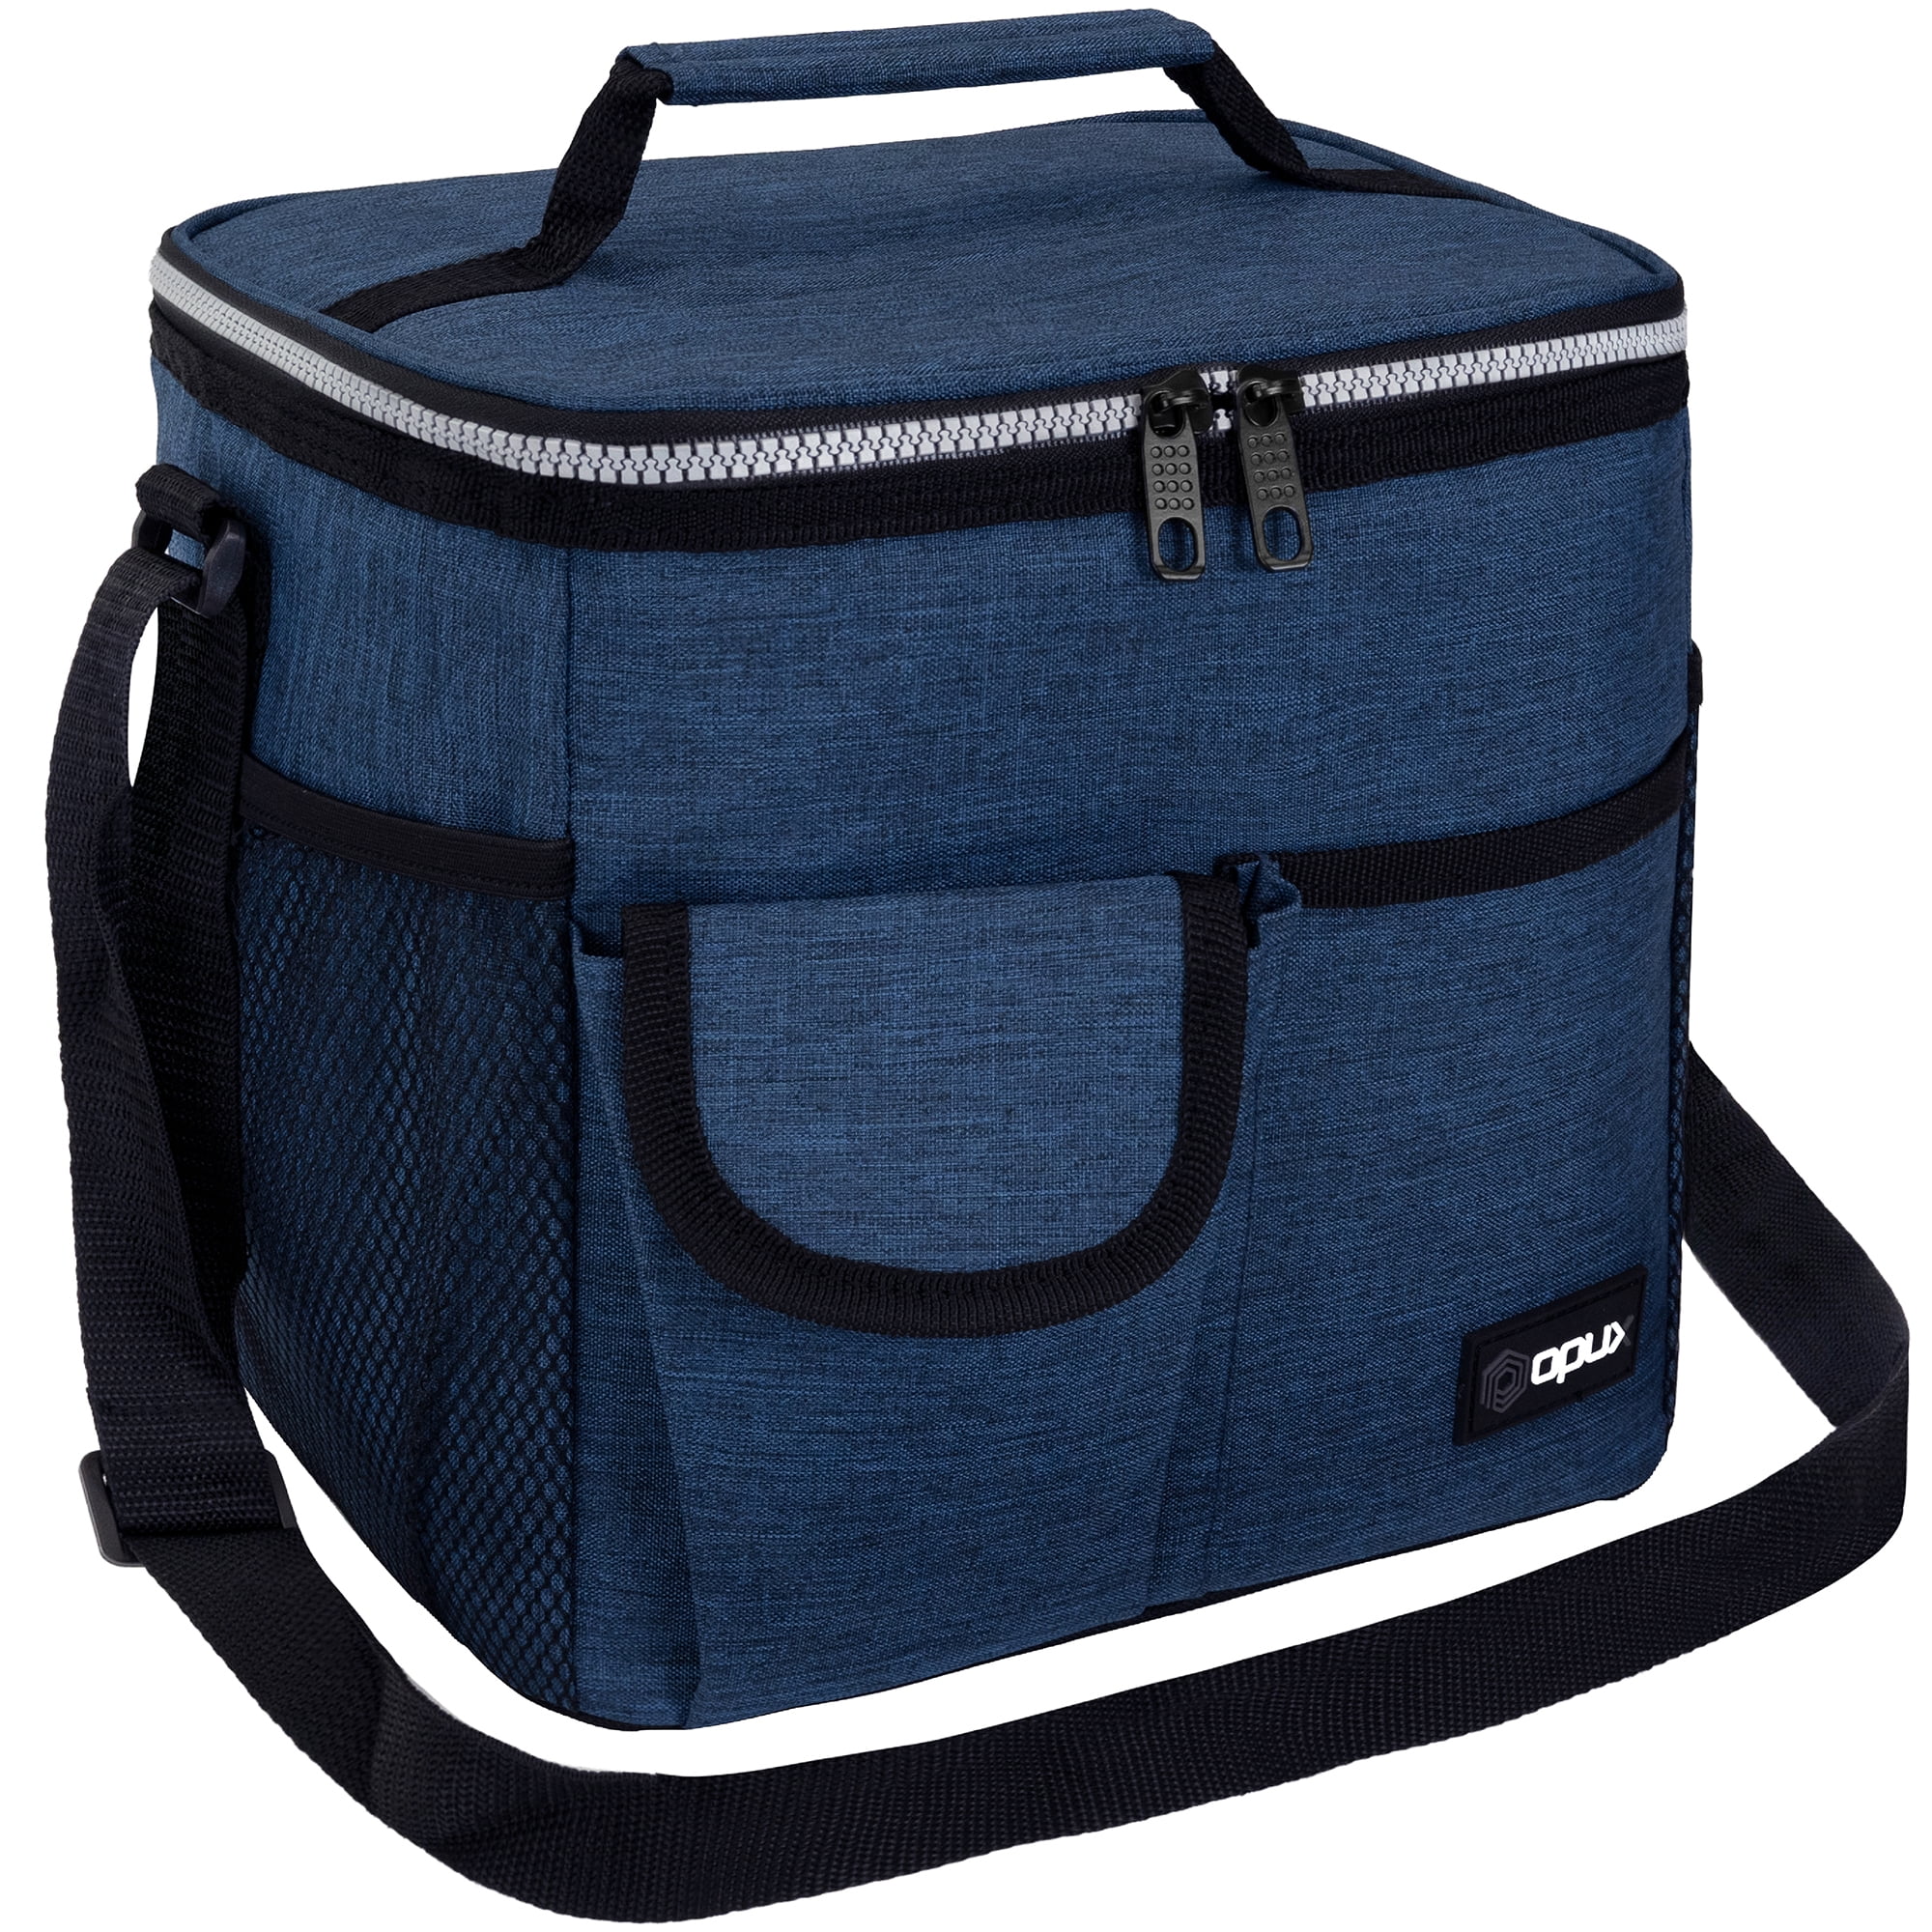 Opux Insulated Lunch Box for Men Women, Leakproof Thermal Lunch Bag Cooler Work Office School, Soft Reusable Lunch Tote with Shoulder Strap, Adult Kid